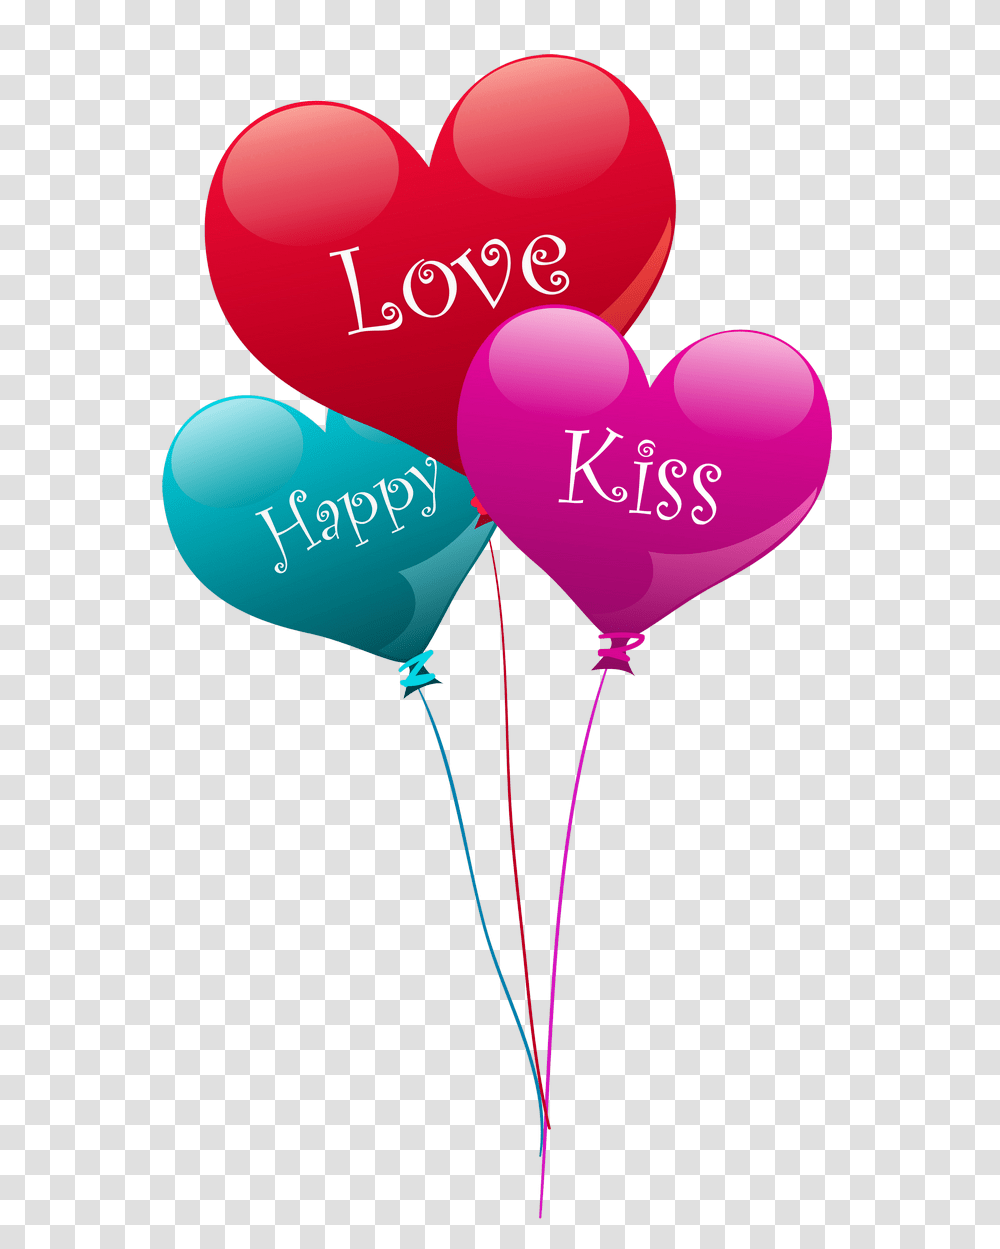 Heart Kiss Love Happy Balloons Clipart With Heart Balloons Clipart Transparent Png